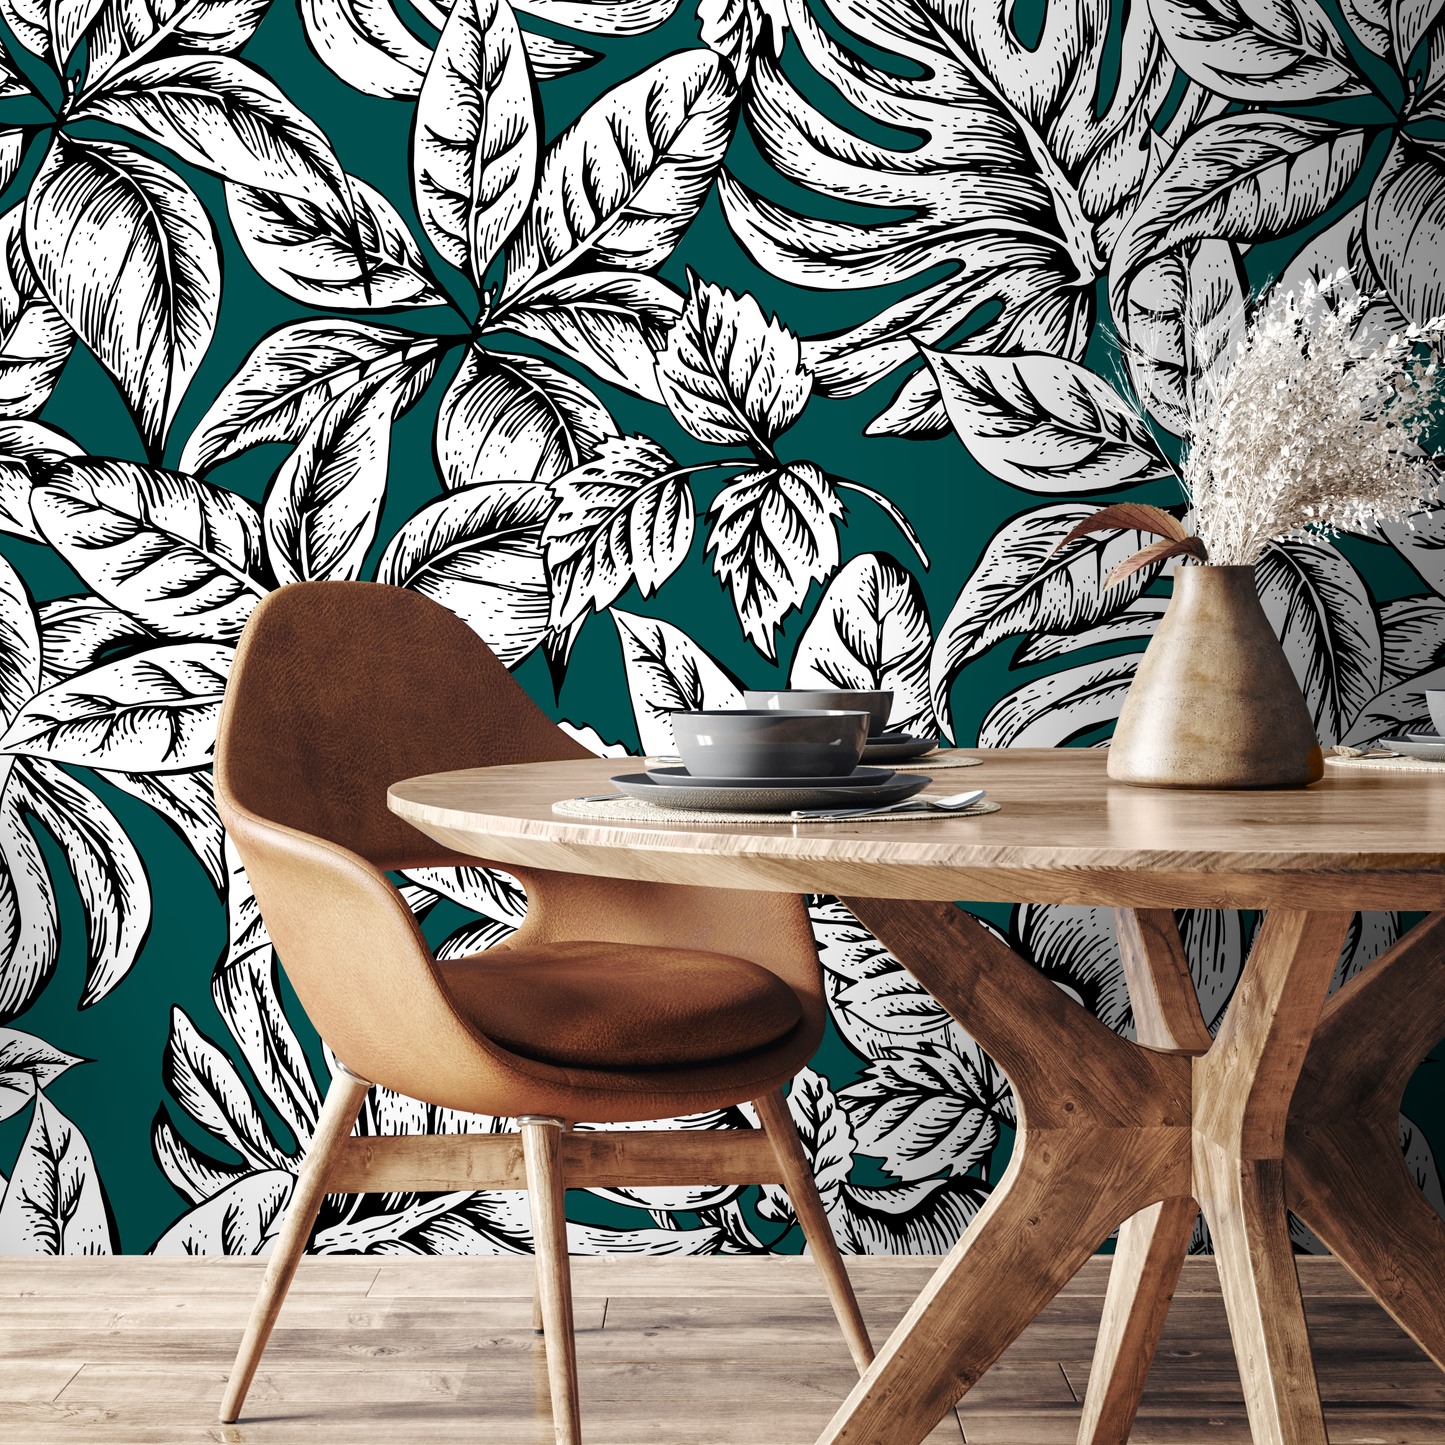 Wallpaper Peel and Stick Wallpaper Removable Wallpaper Home Decor Wall Art Wall Decor Room Decor / Tropical Leaves Wallpaper - B615